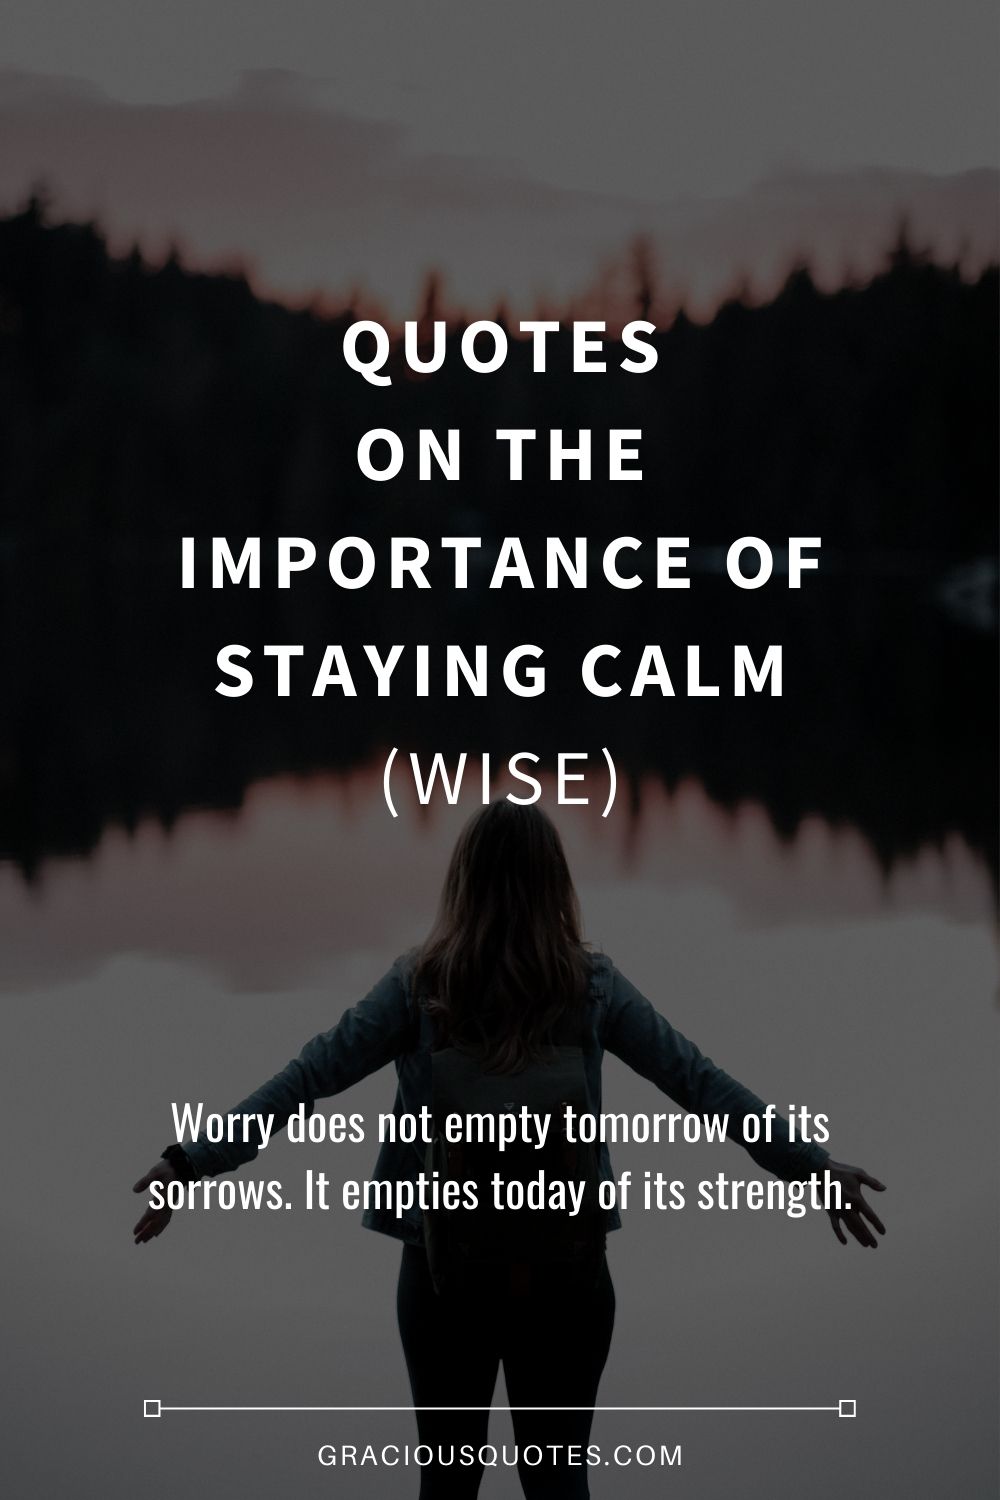 Calm People Quotes